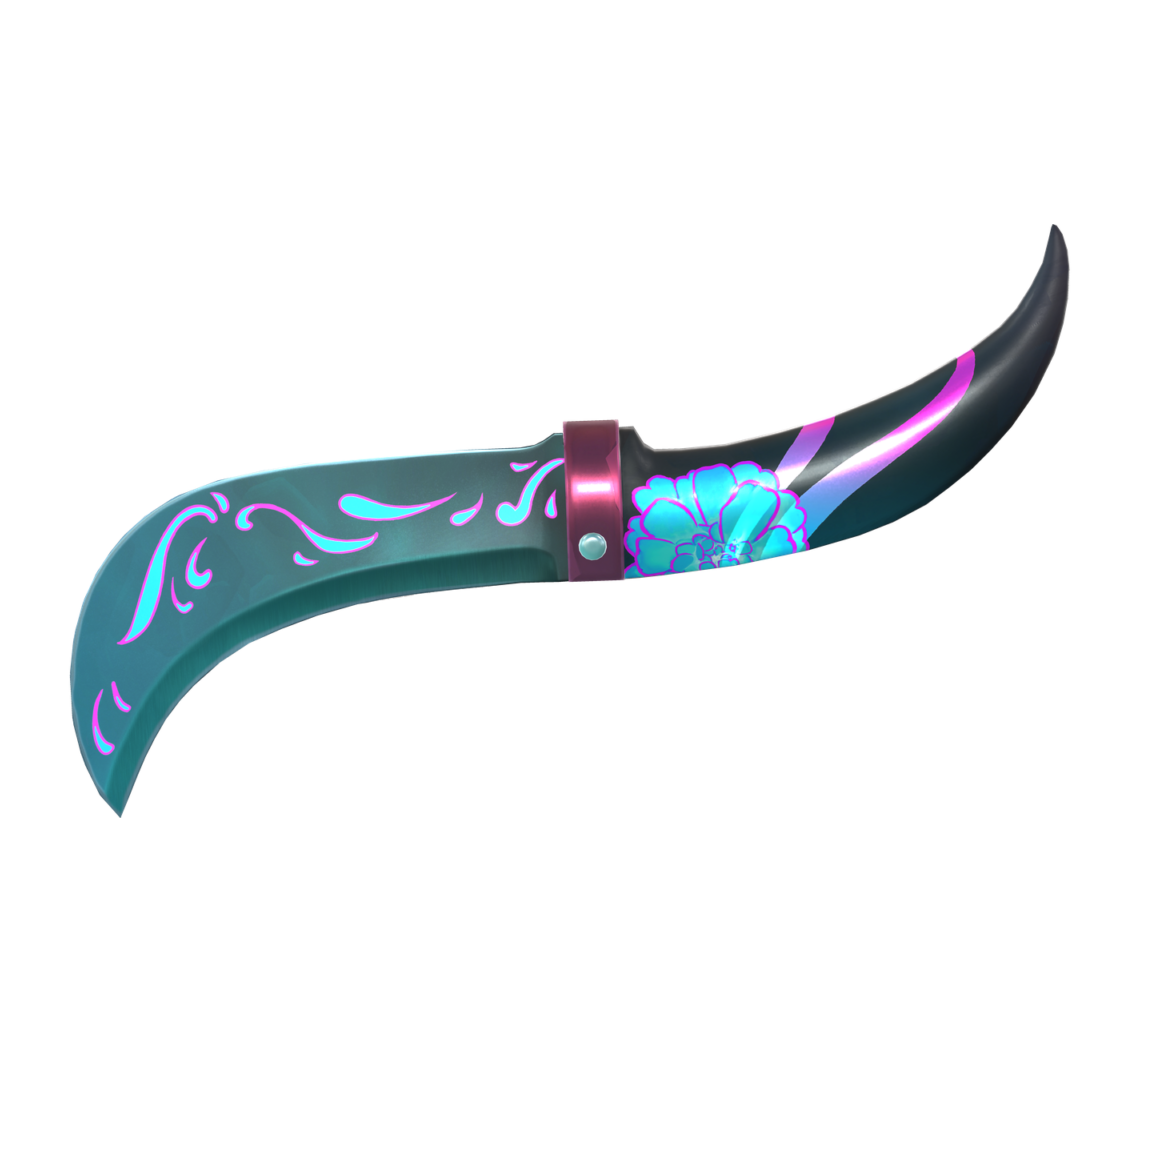 Imperium knife from Project A